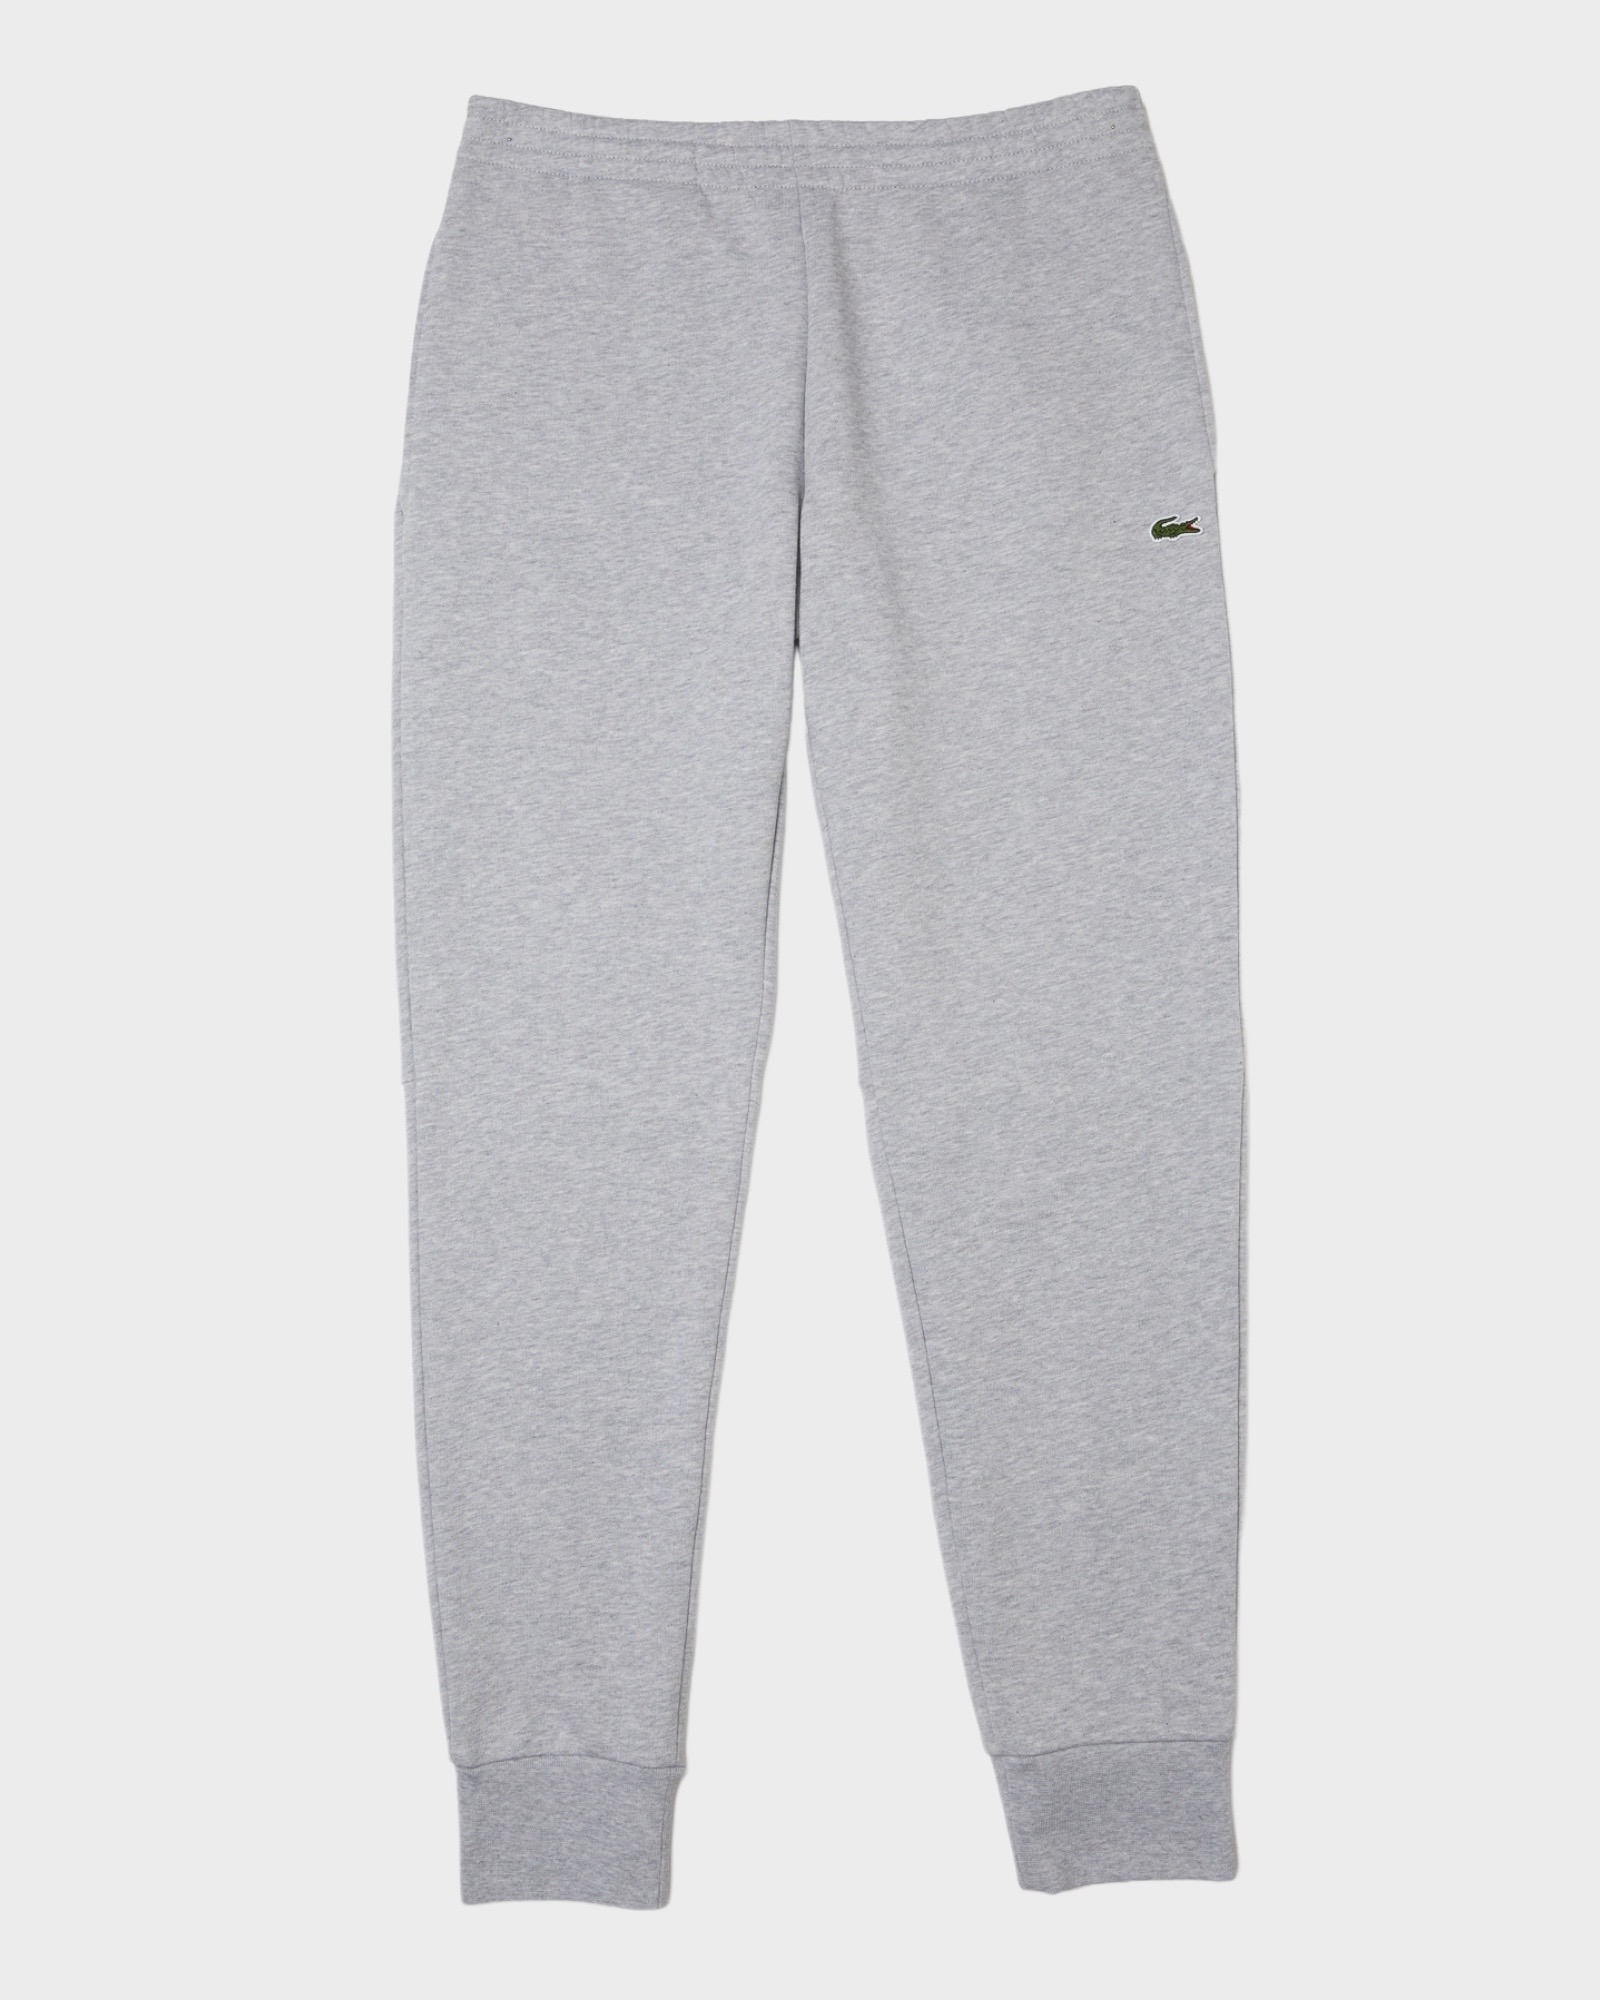 Lacoste Sweatpants - grå | style no. XH7611-00 Lacoste Rungsted Havn | Sct.